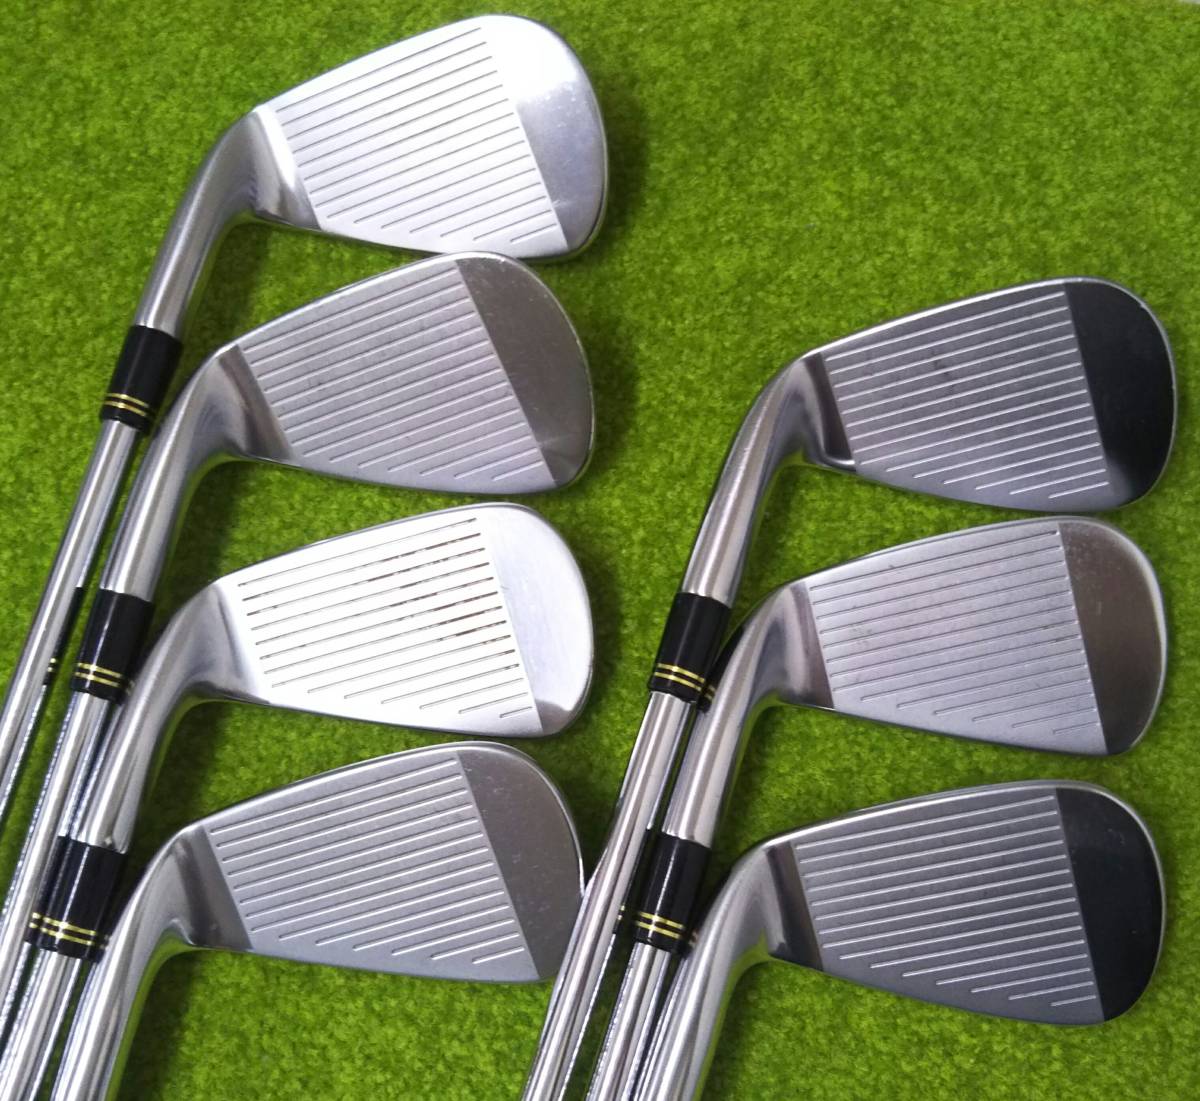 TaylorMade GLOIRE F N.S.PRO930GH フレックスR 5-9,P,A 7本セット アイアンセット 店舗受取可_画像2